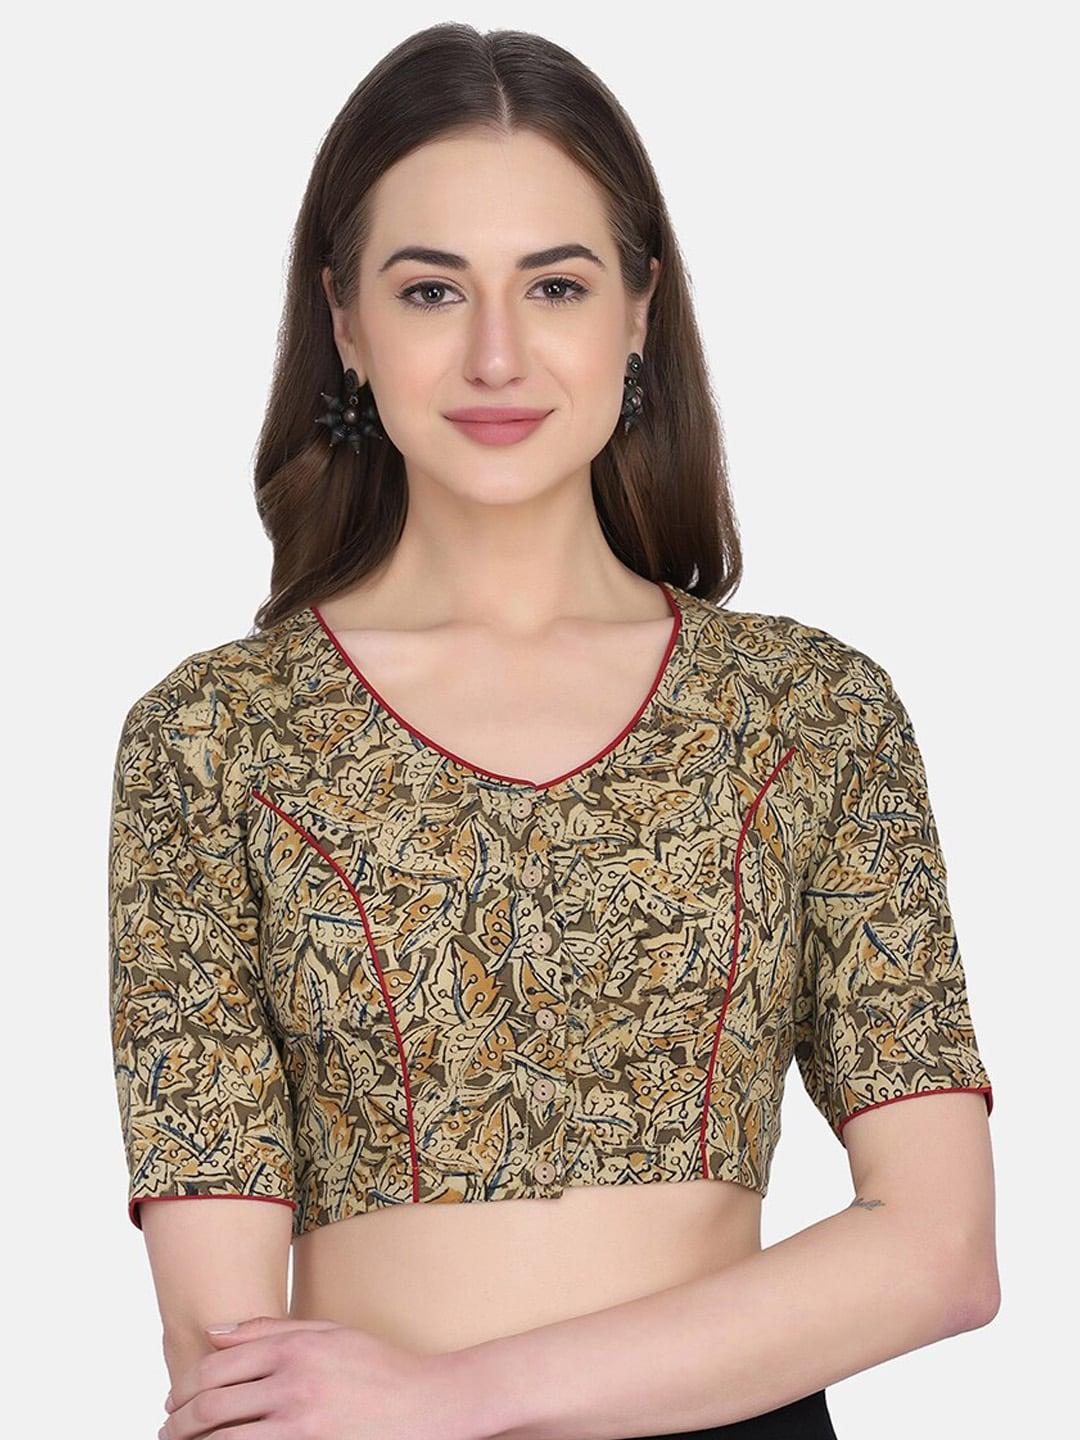 the-weave-traveller-brown-&-green-hand-block-printed-cotton-saree-blouse